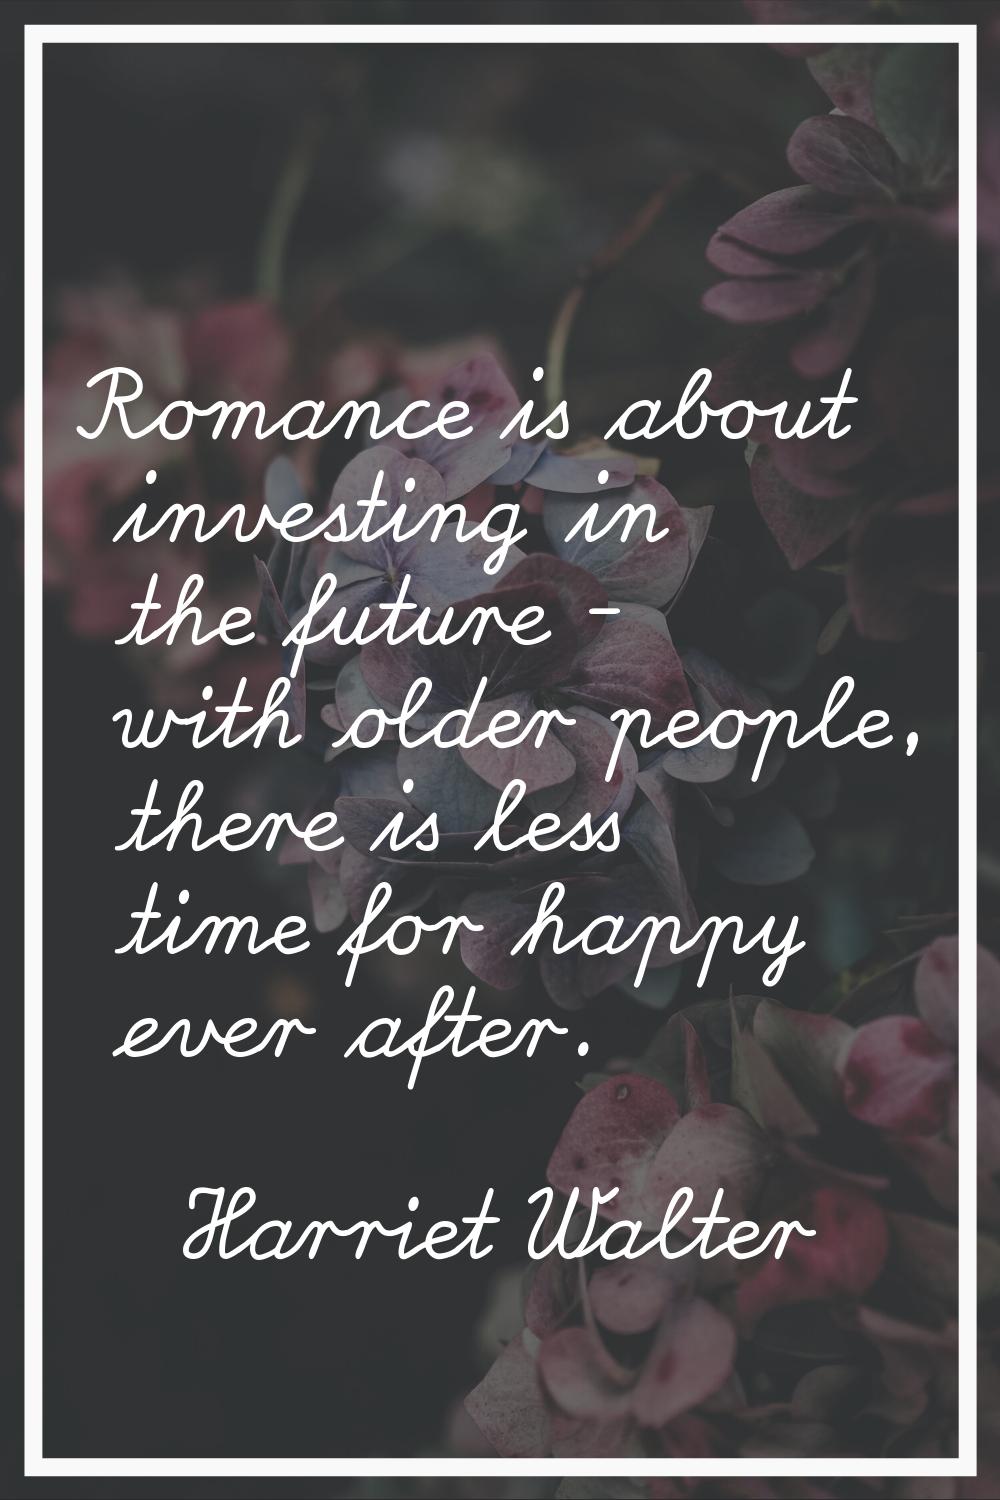 Romance is about investing in the future - with older people, there is less time for happy ever aft